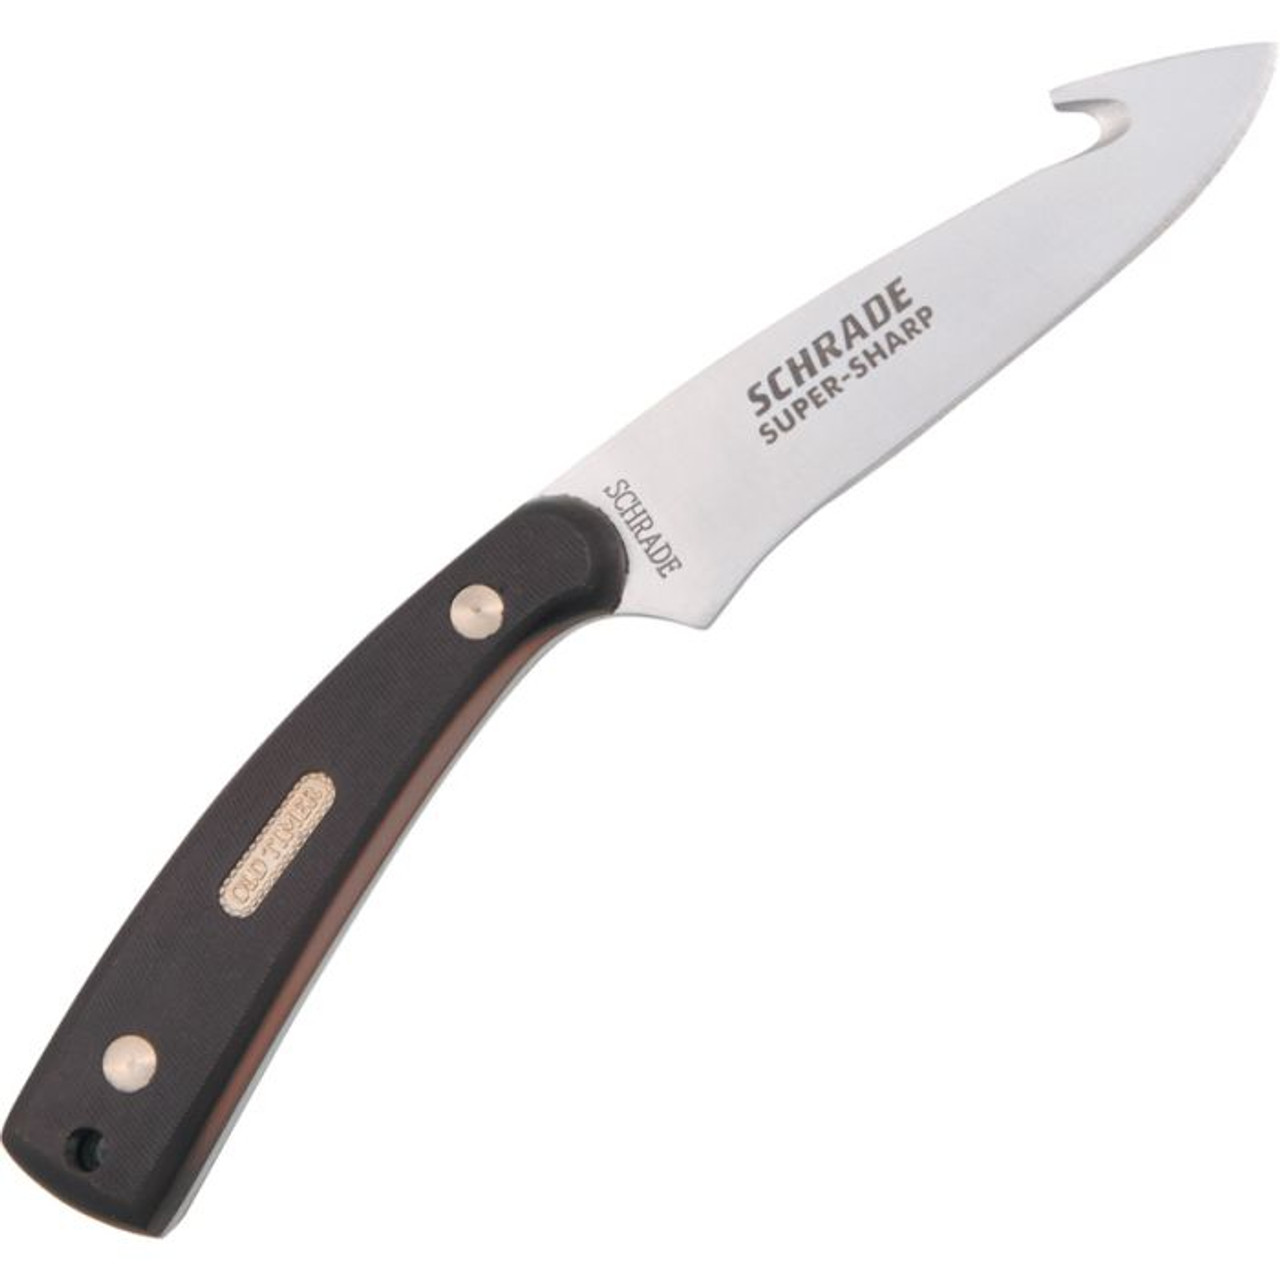 Old Timer Schrade Knives - The Schrade 156OT Lil' Finger Fixed